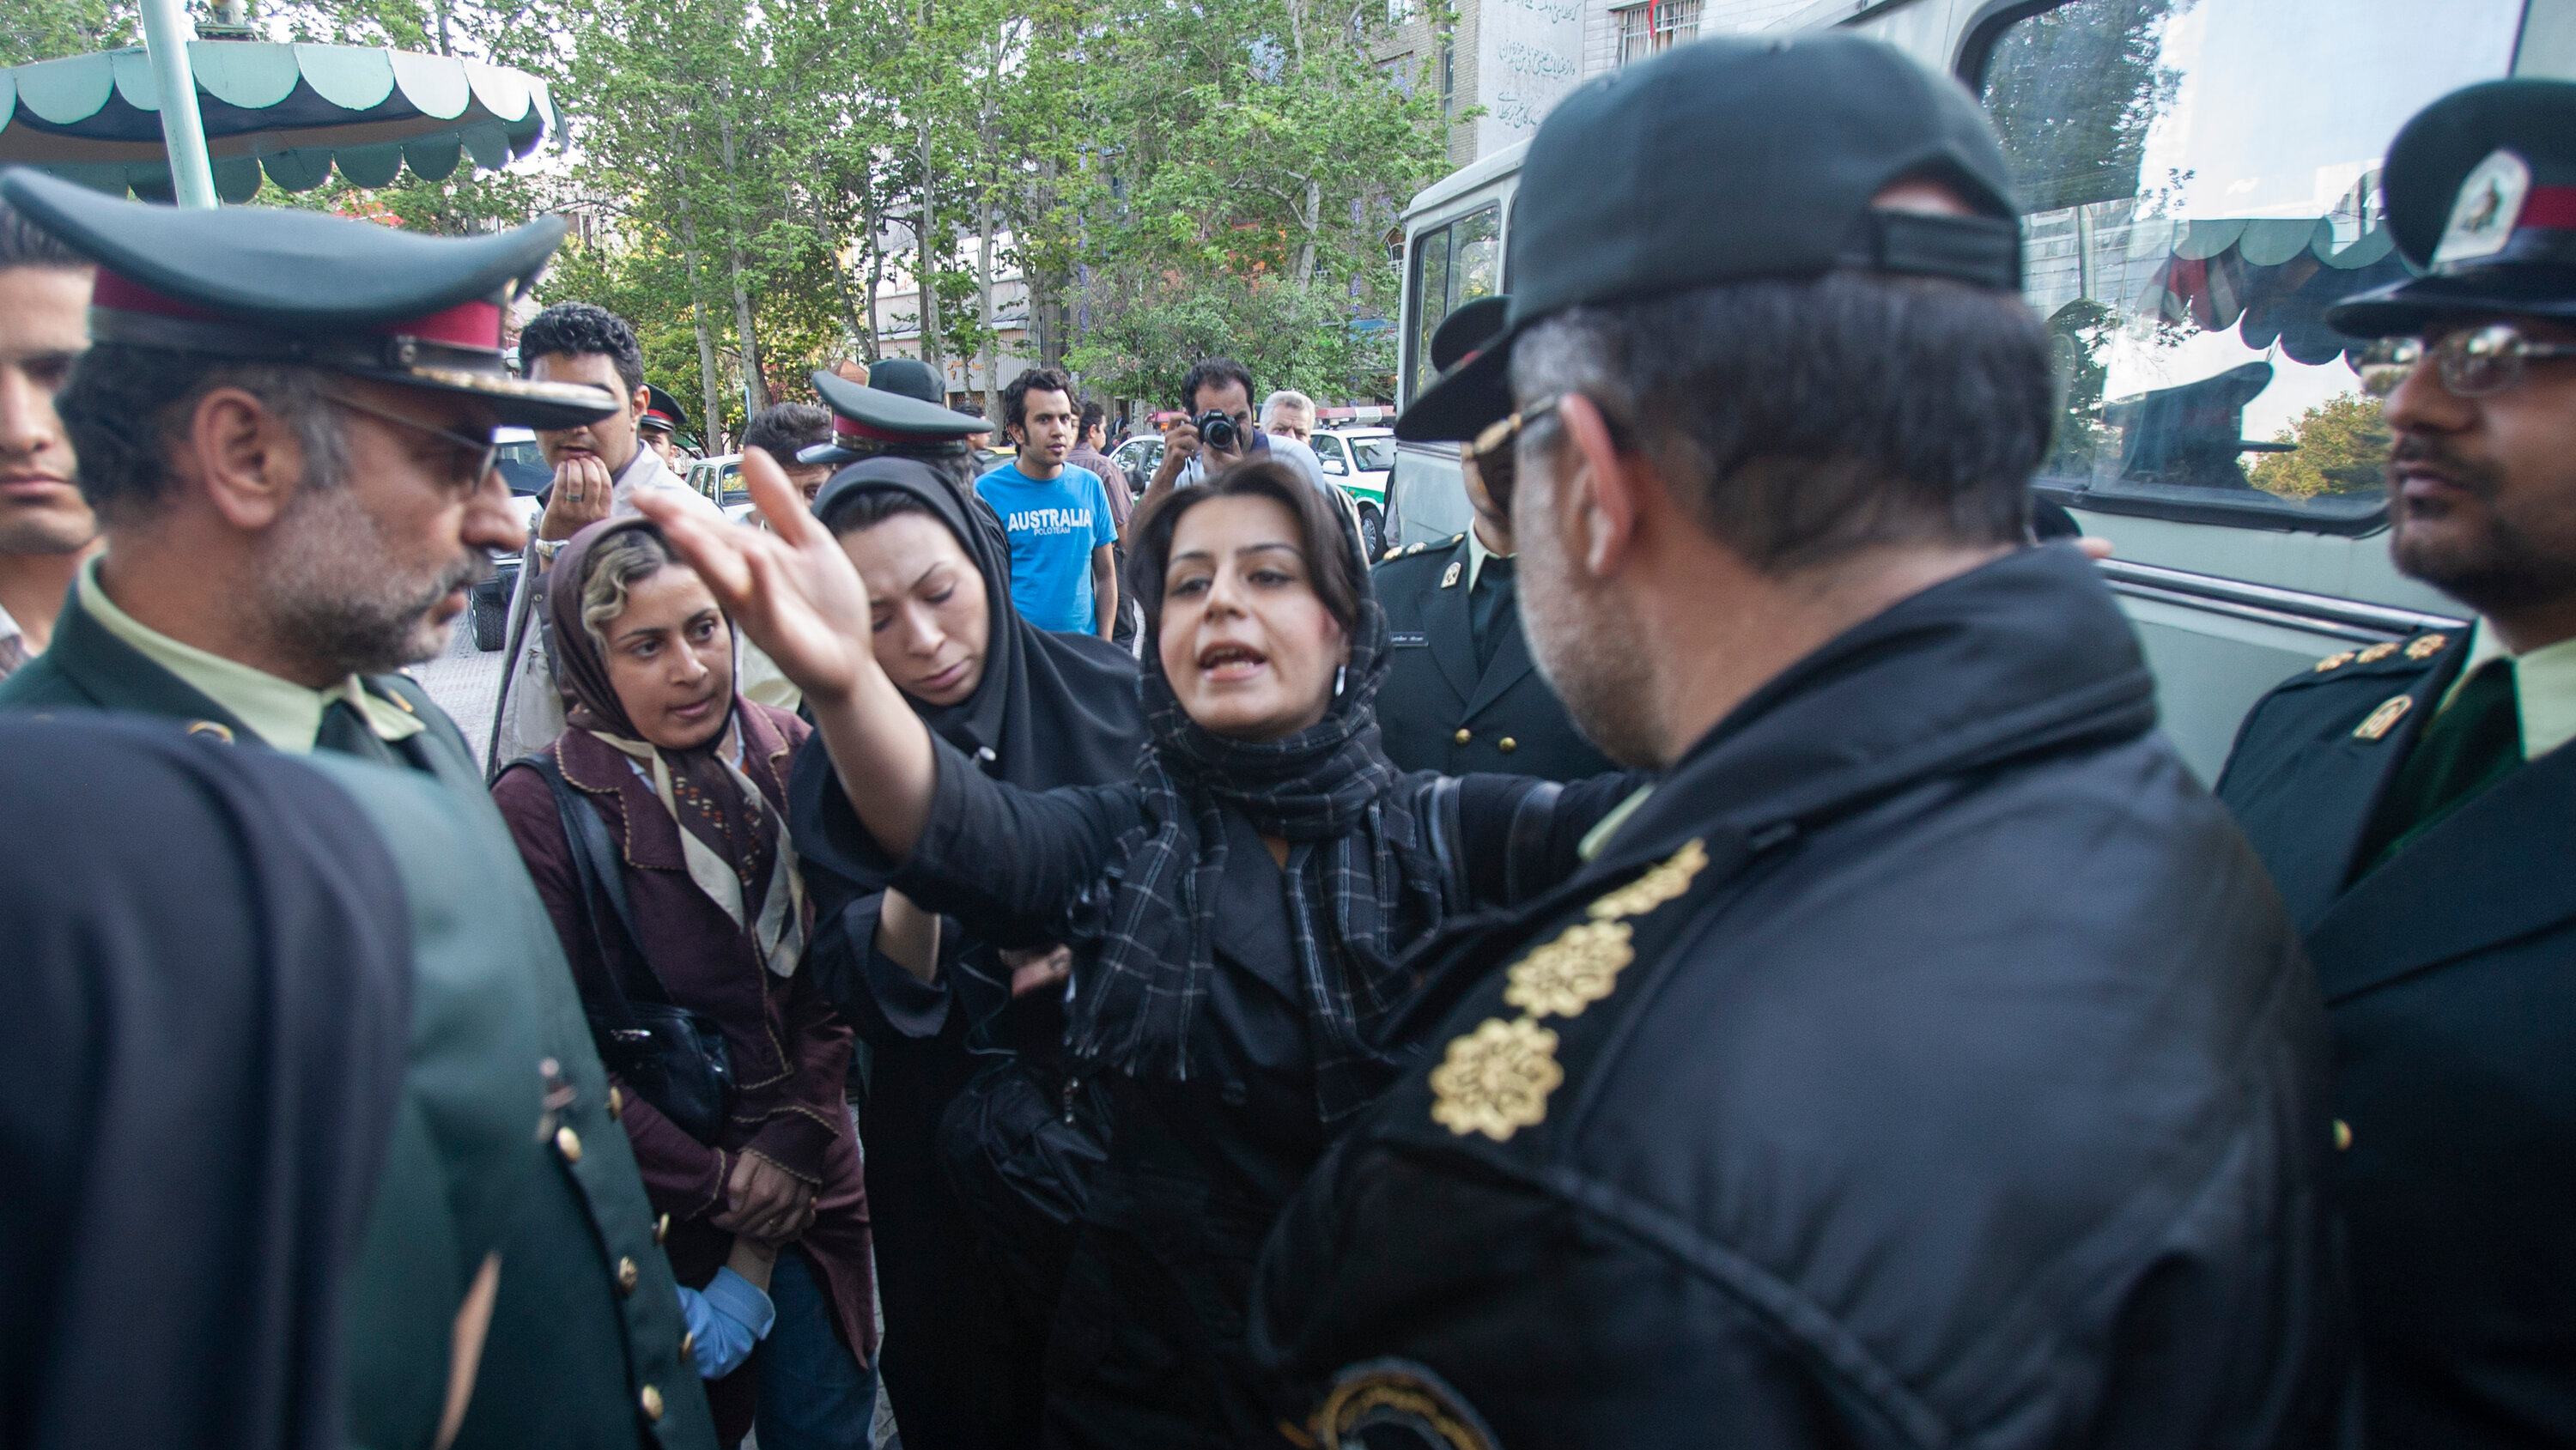 'Mother was Whipped while I was also beaten on the road. Don't trust the Iran government, Morality police abolished to stop Protests', Says Protestors